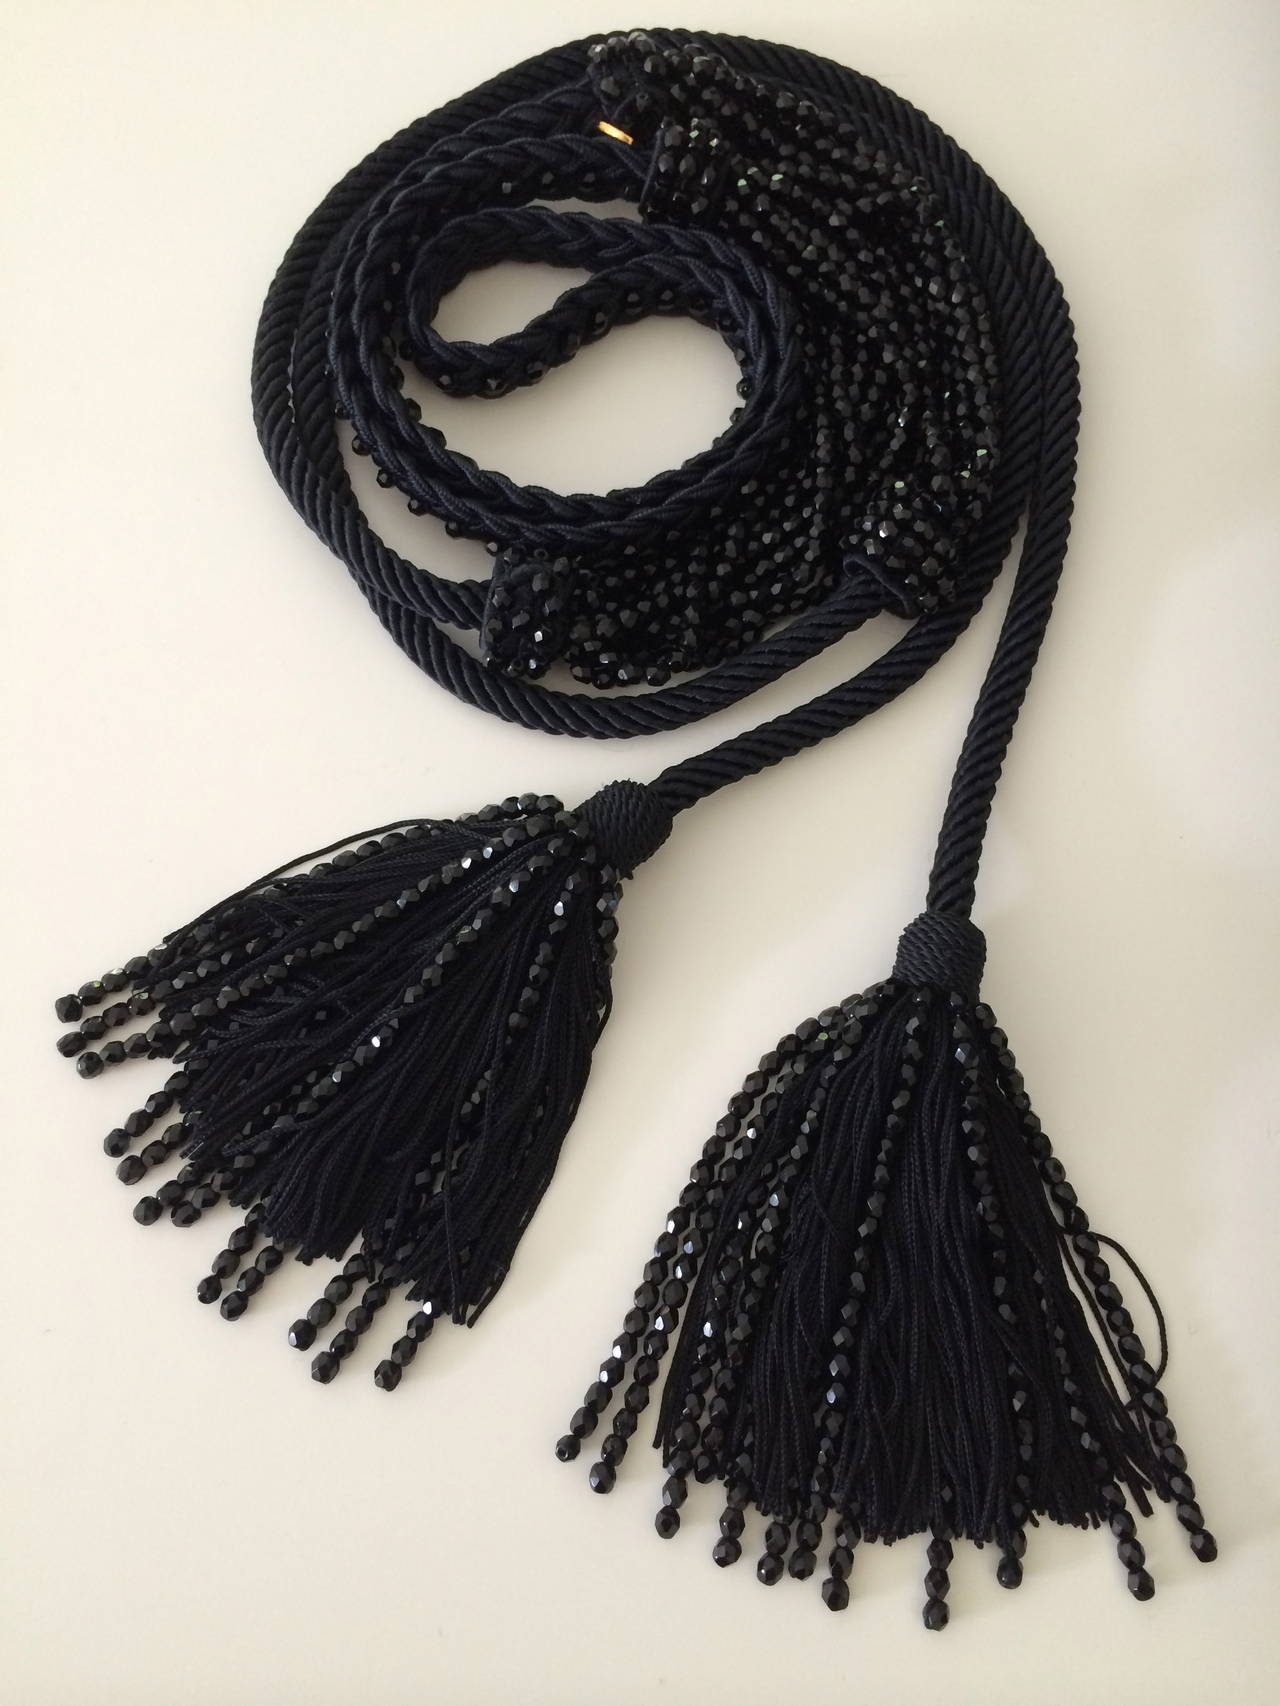 Gorgeous Yves Saint Laurent Necklace with beaded tassels
This necklace has so many possibilities! Worn in front, or  for a backless dress, a belt.... its truly beautiful.
The necklace measures approximately 38 inches, the tassels alone measure 4